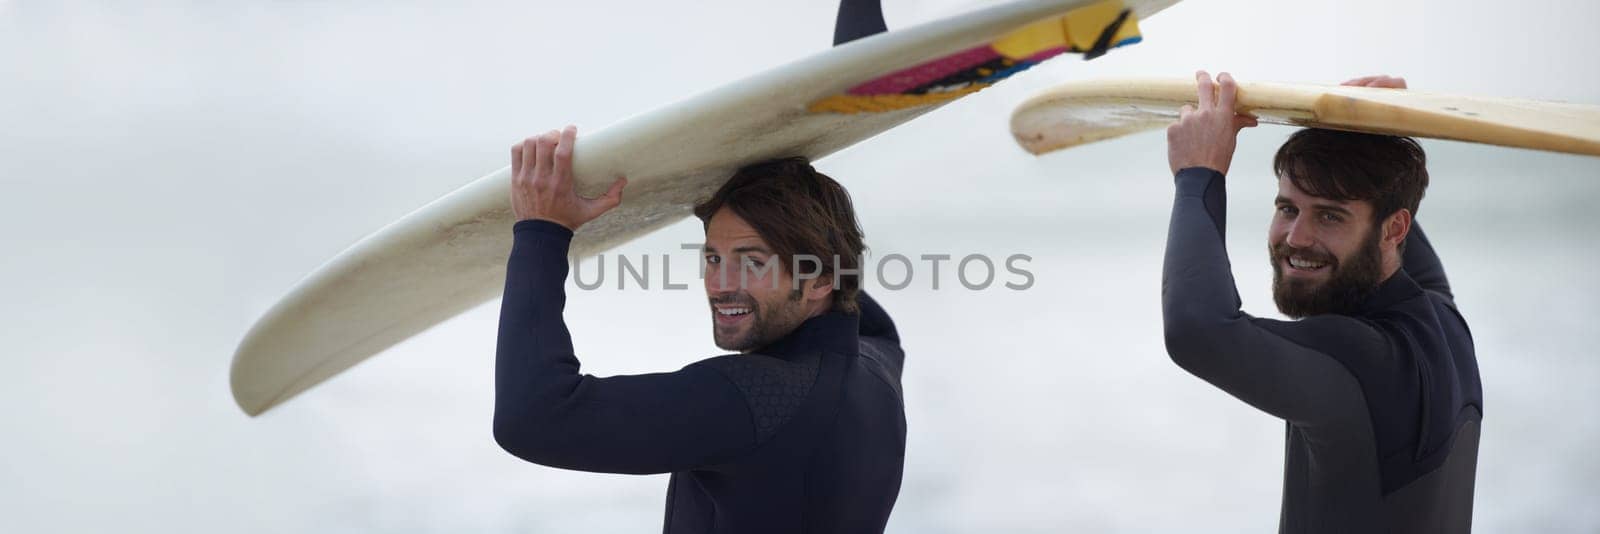 Man, friends and banner of surfer on beach for fitness, sport or waves on shore in outdoor exercise. Portrait of male person or people with surfboard for surfing challenge or hobby by ocean in nature.